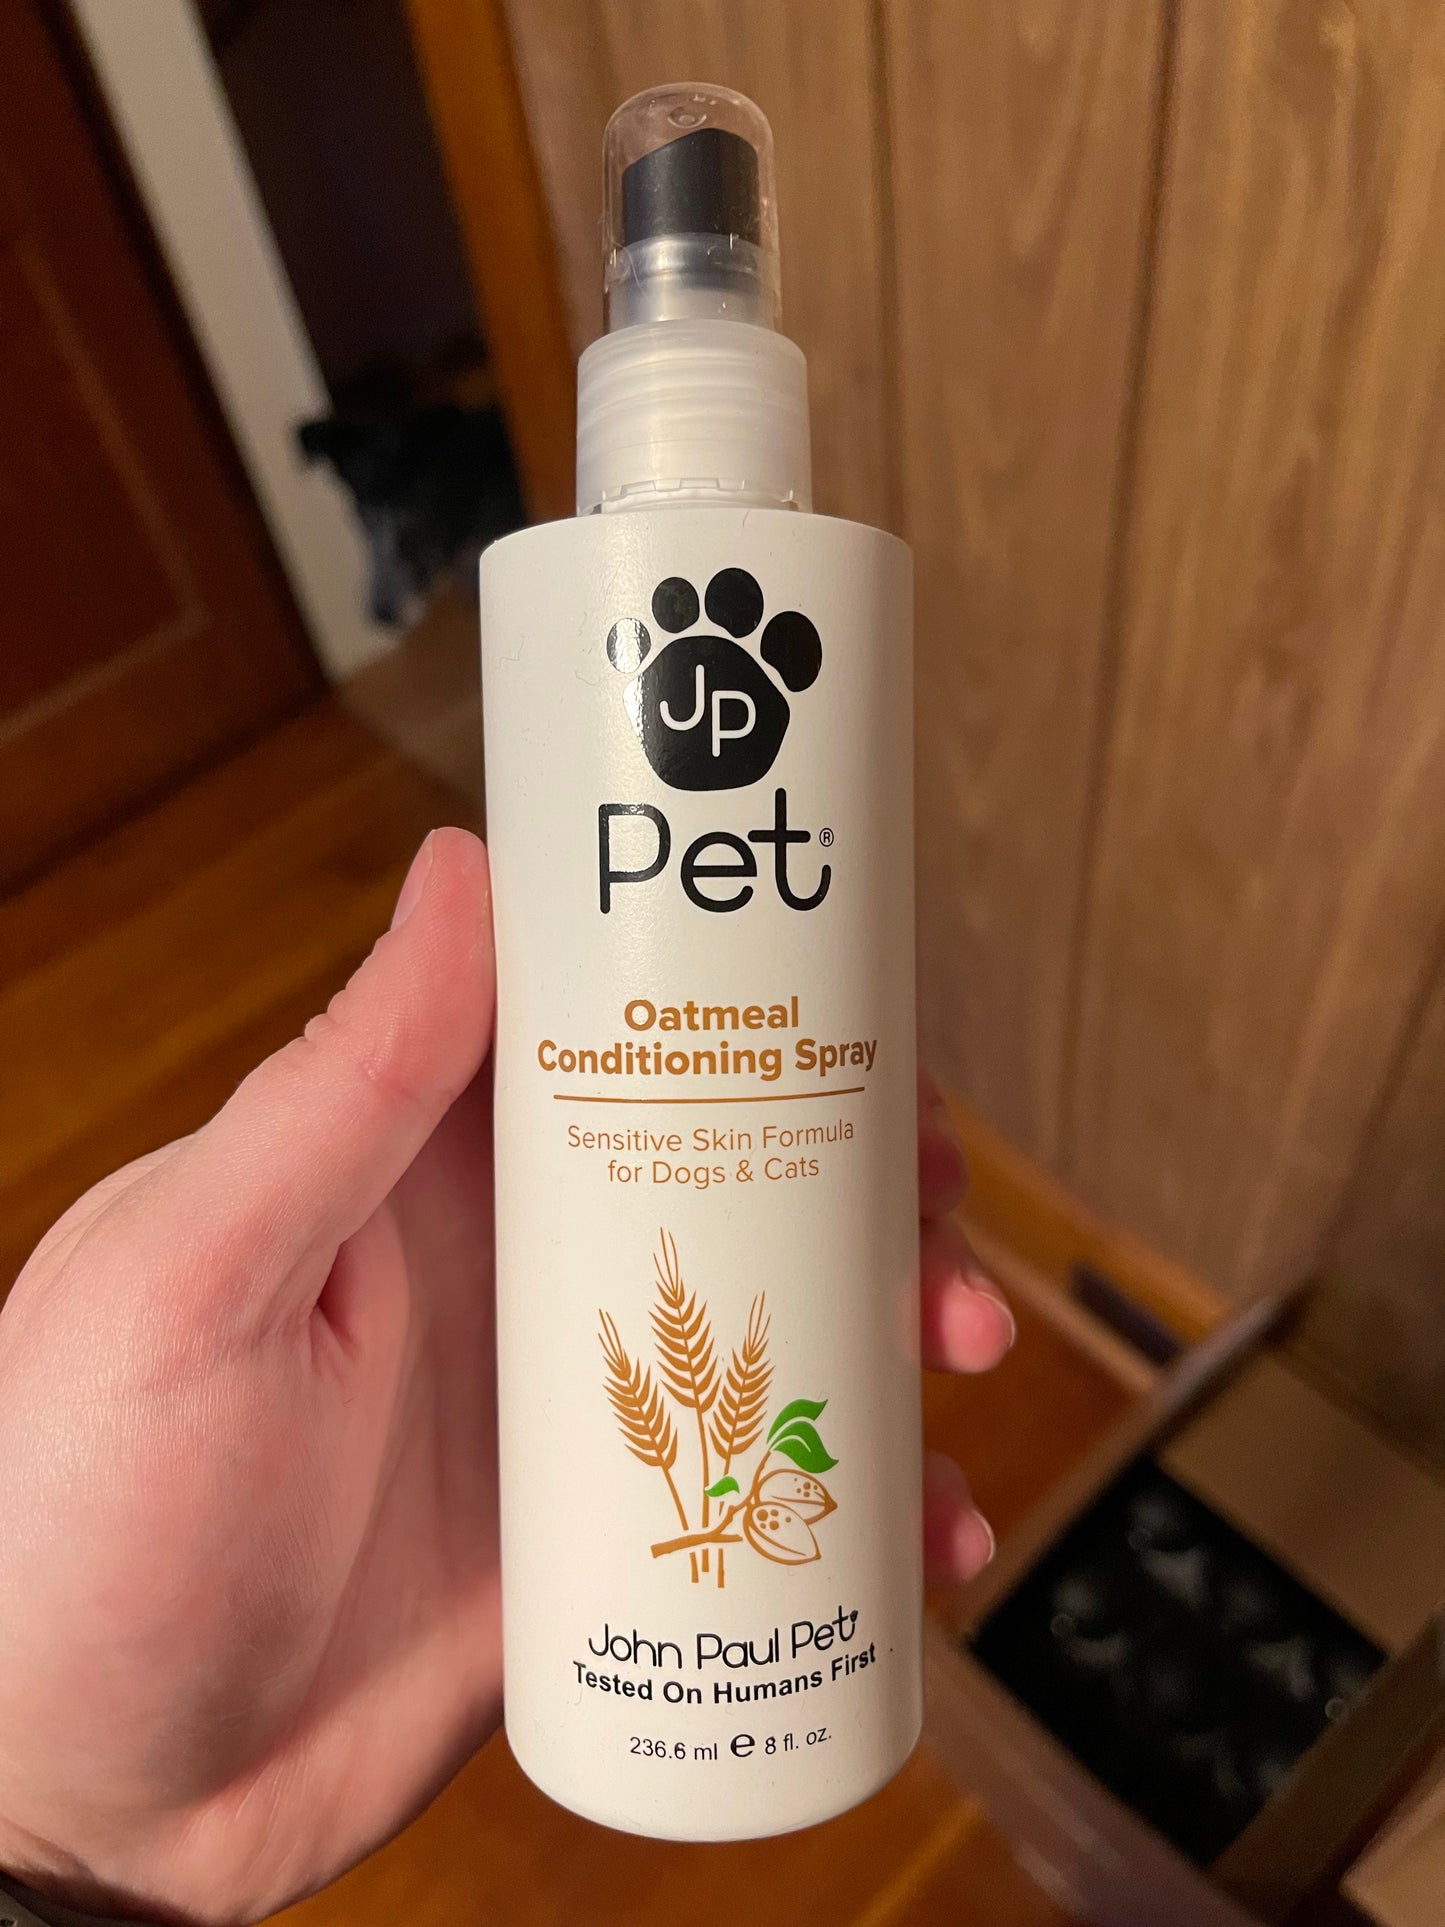 Oatmeal conditioning SPRAY